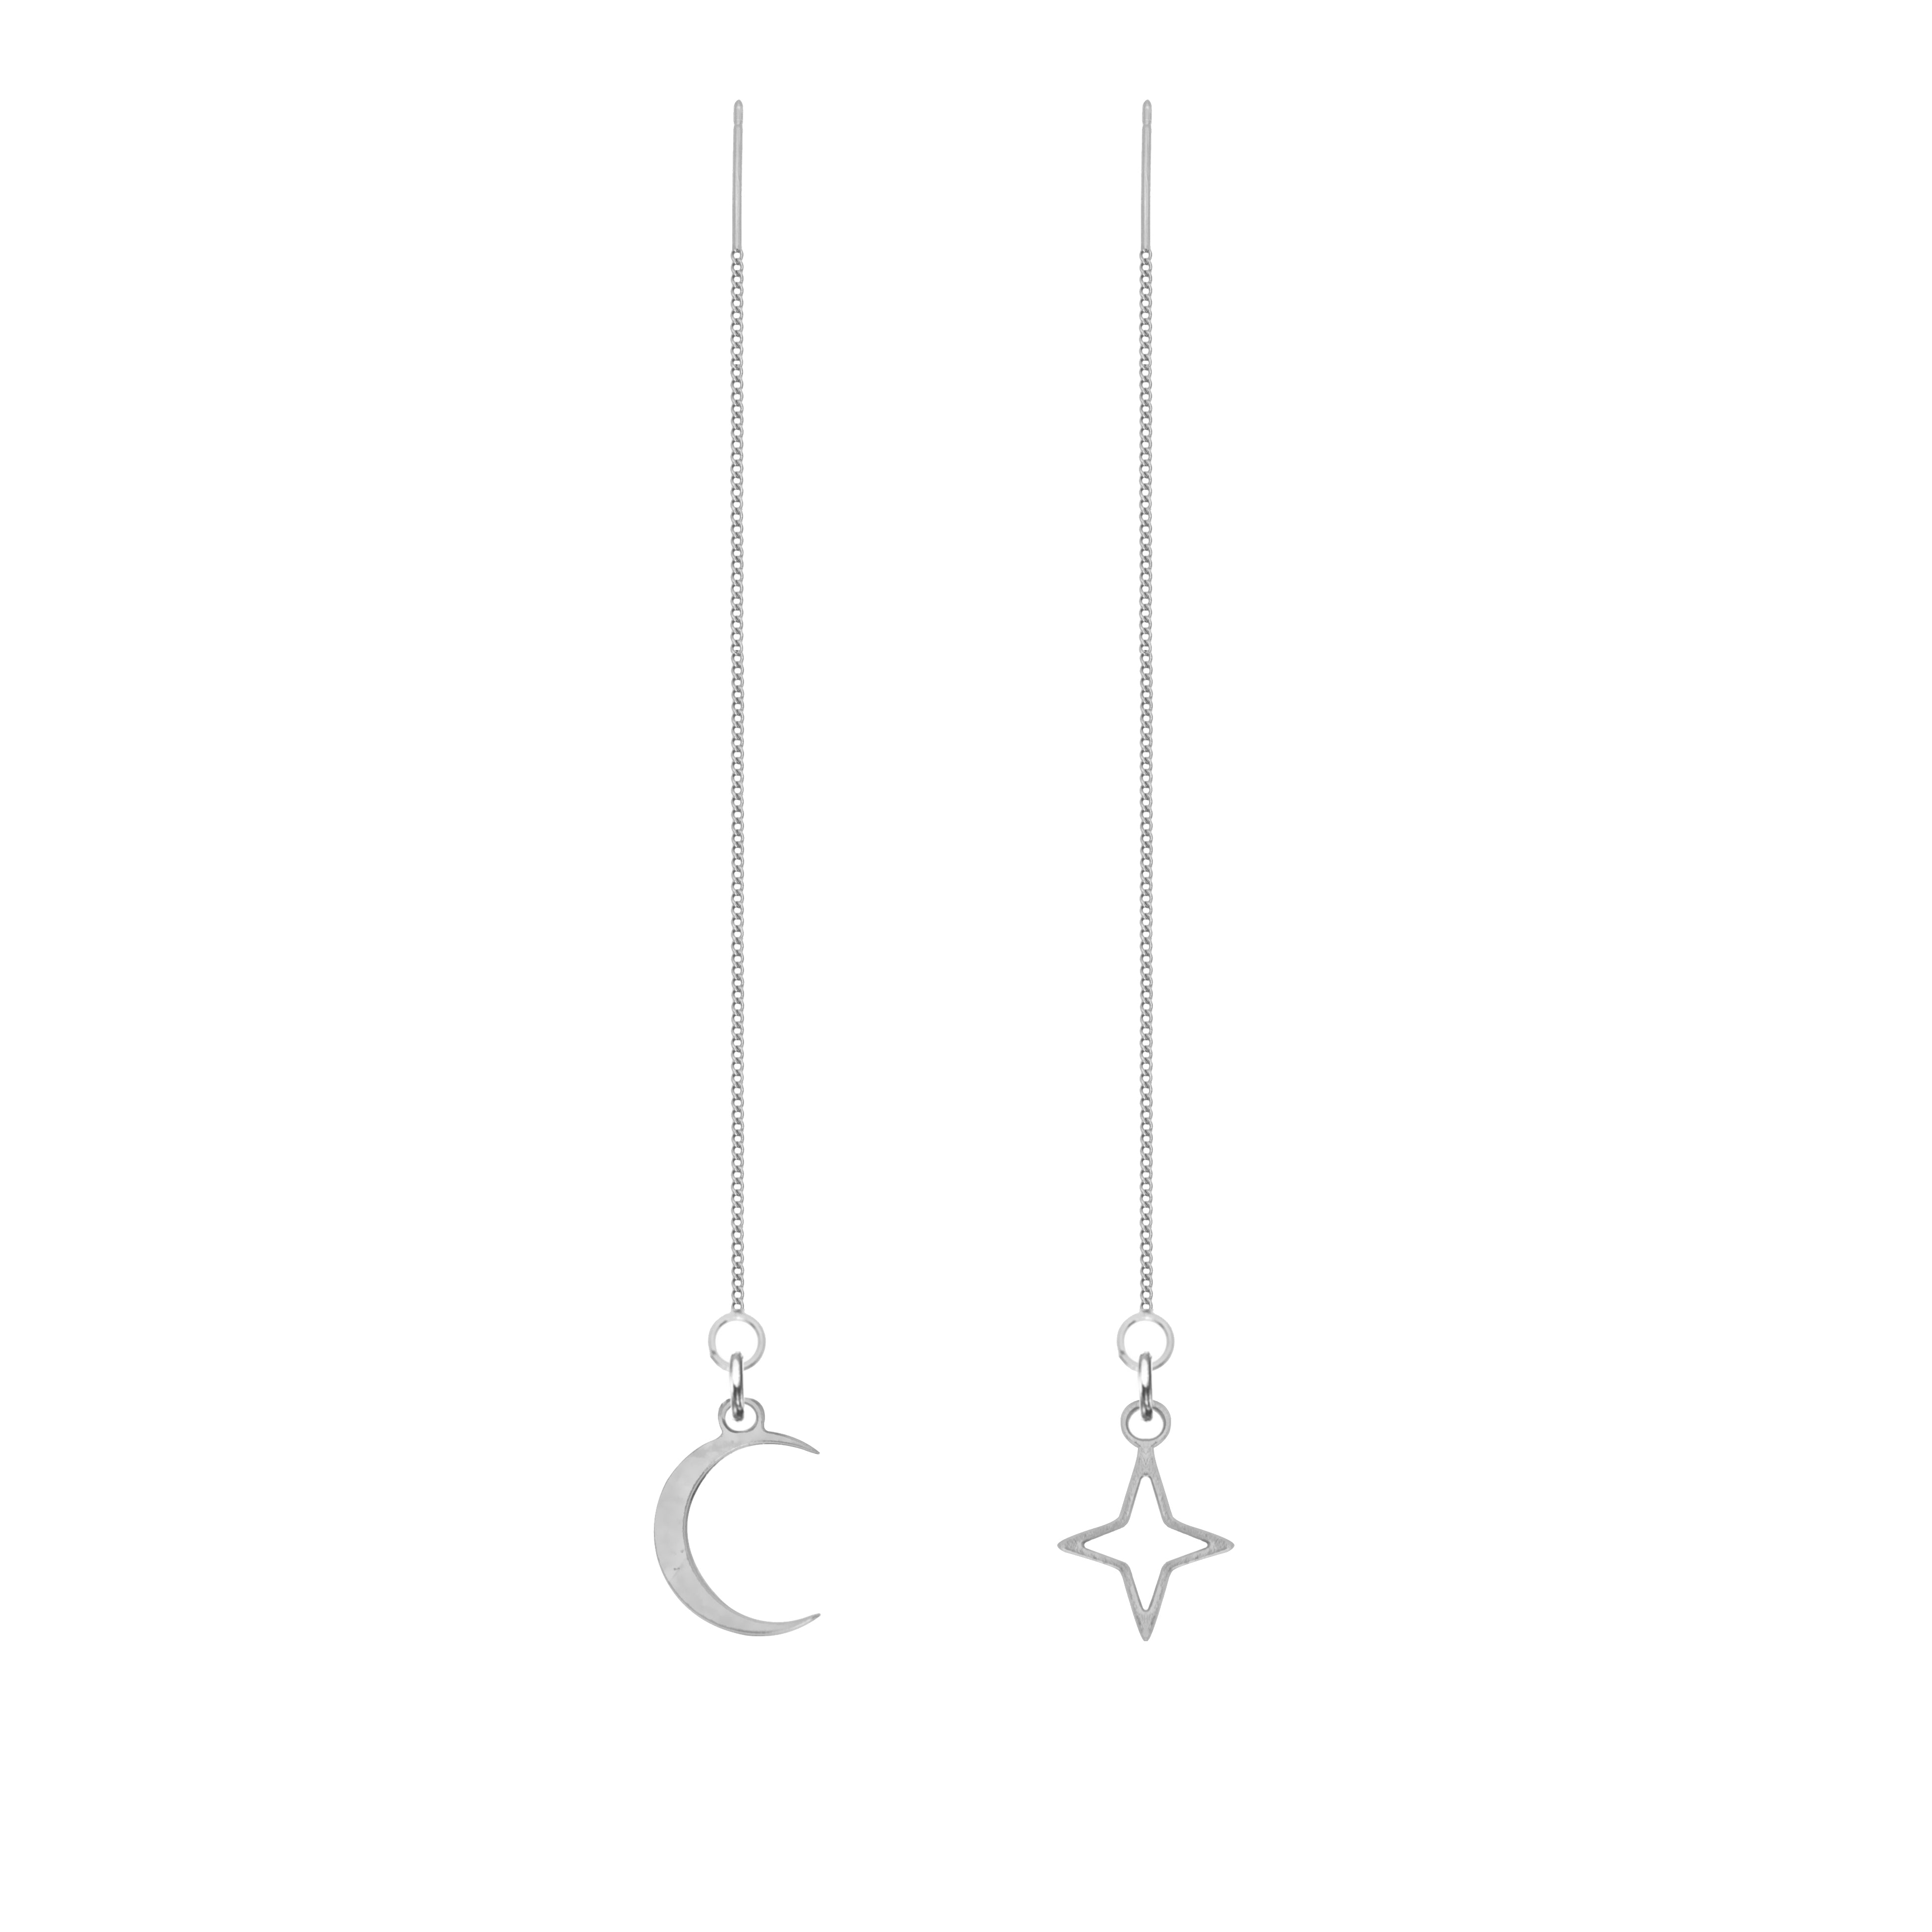 stainless steel threader earrings with moon and stars